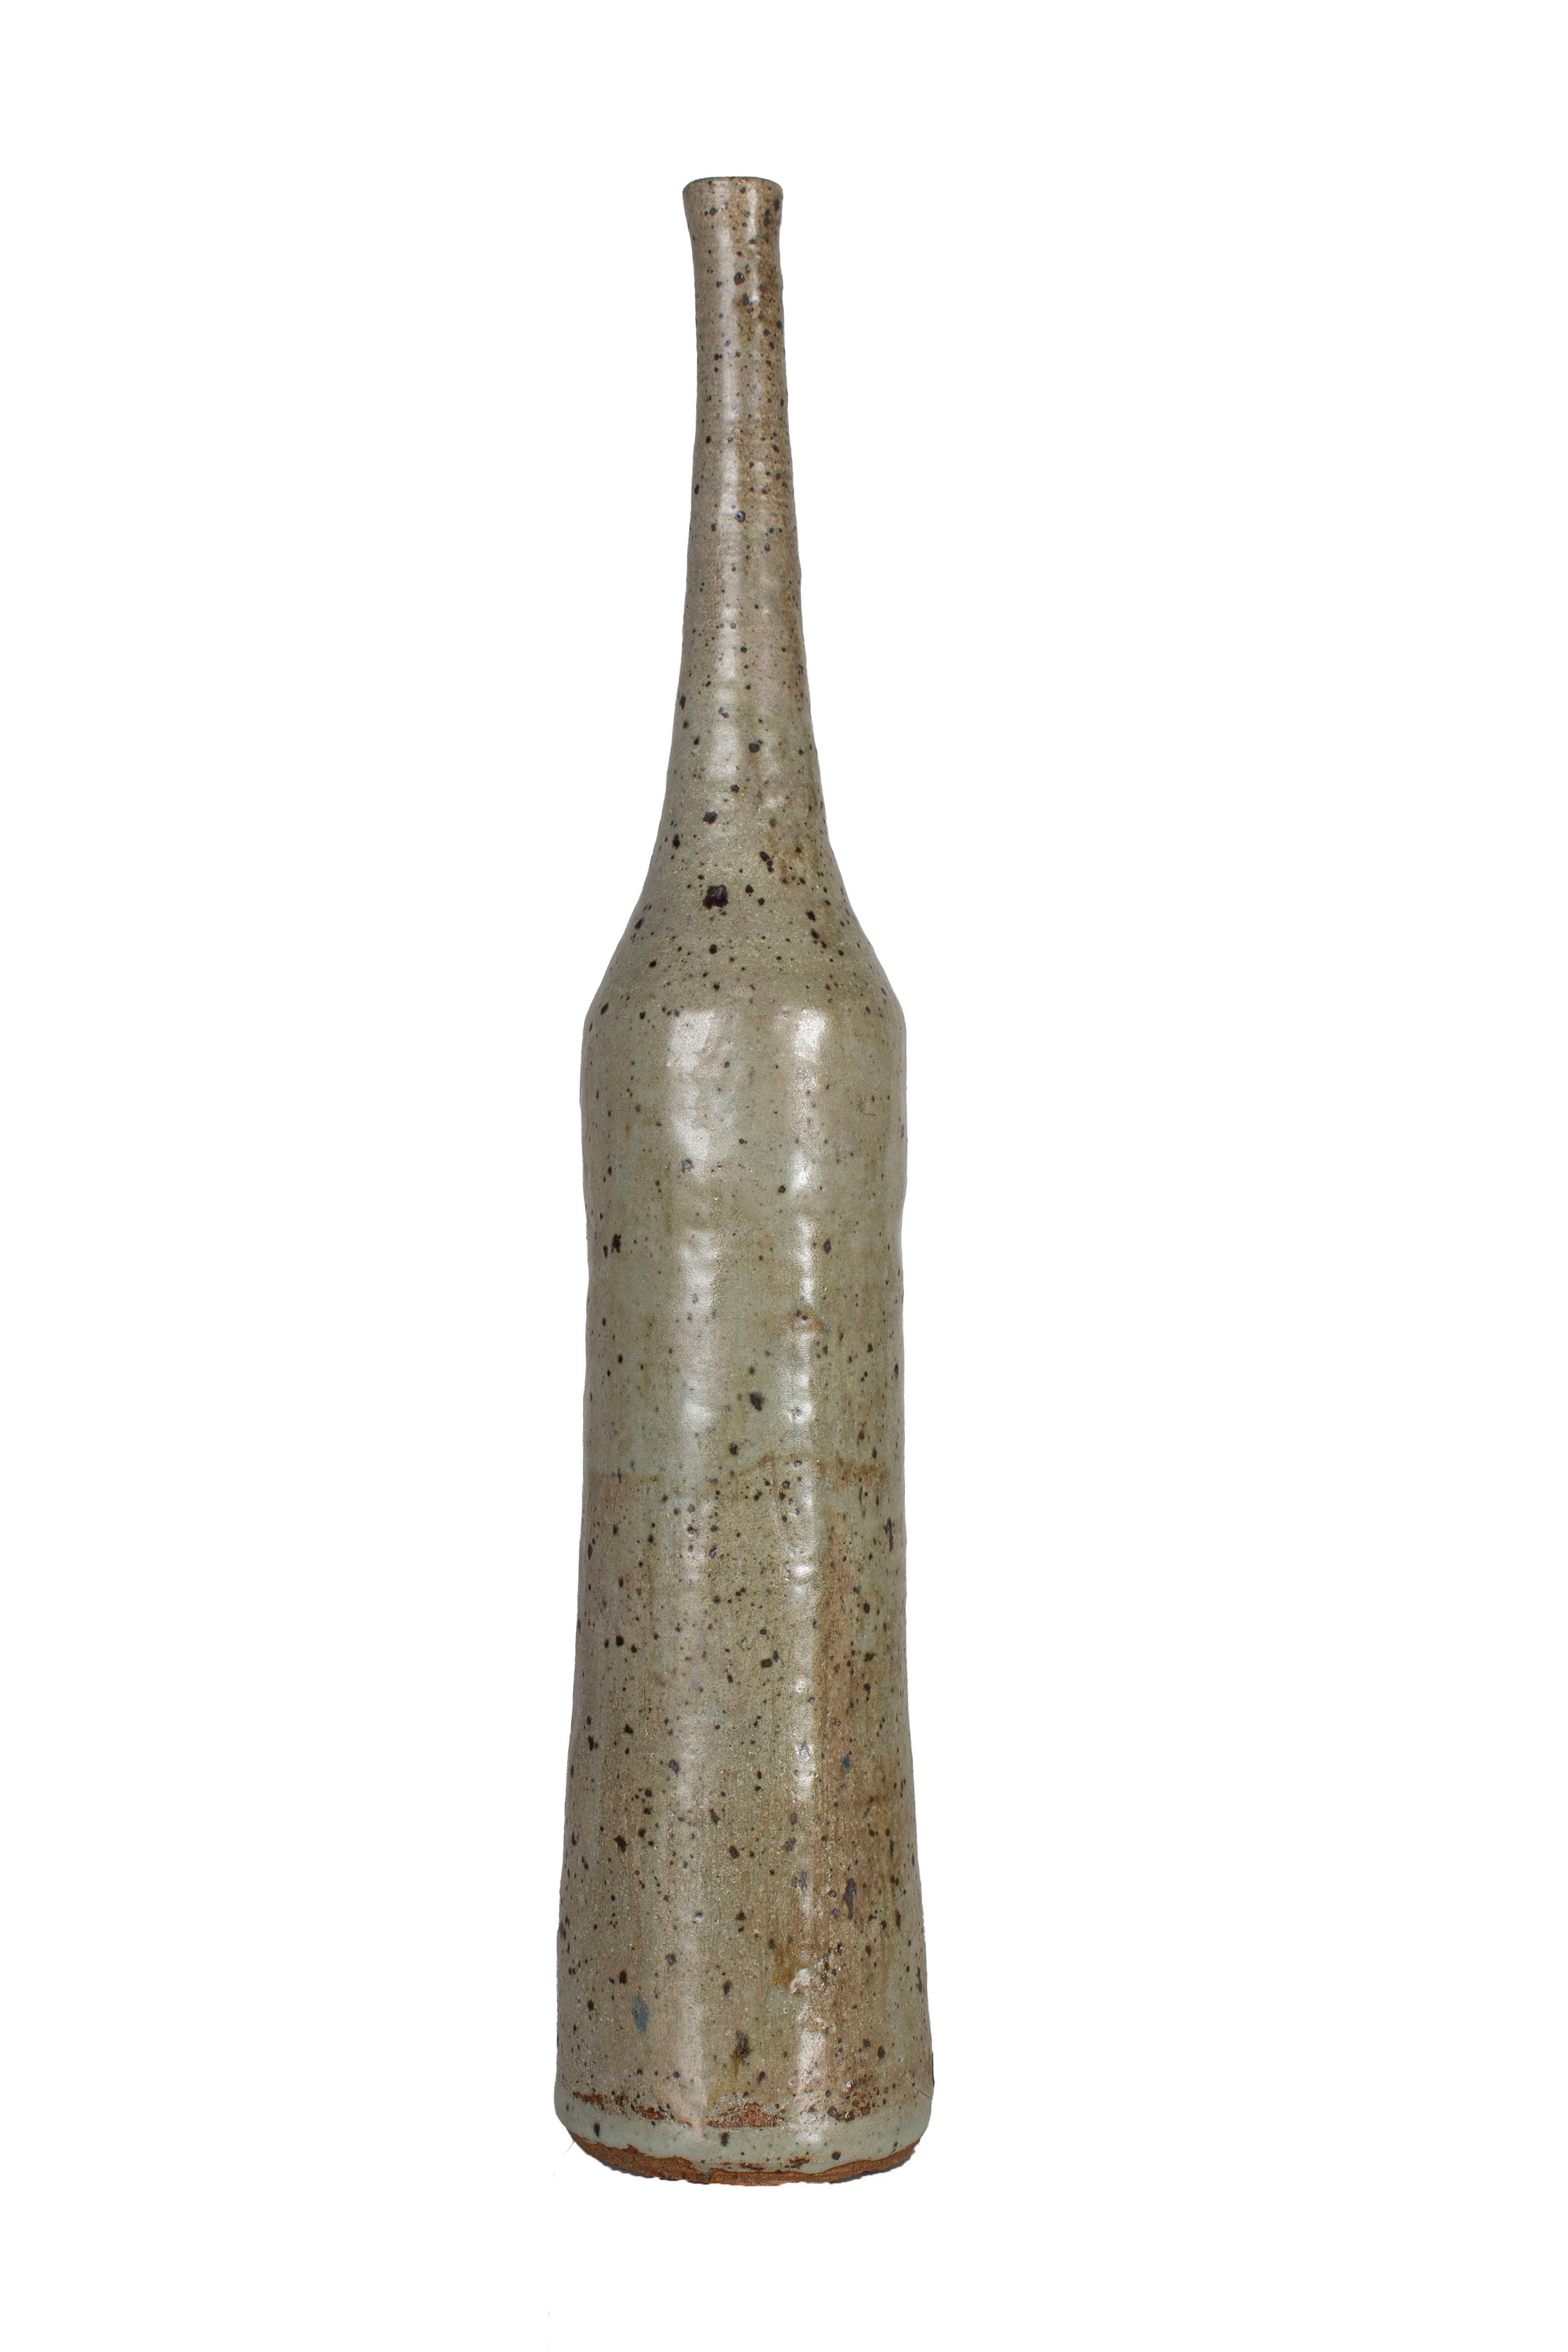 Primitive Tall Hand Thrown Bottle Signed 